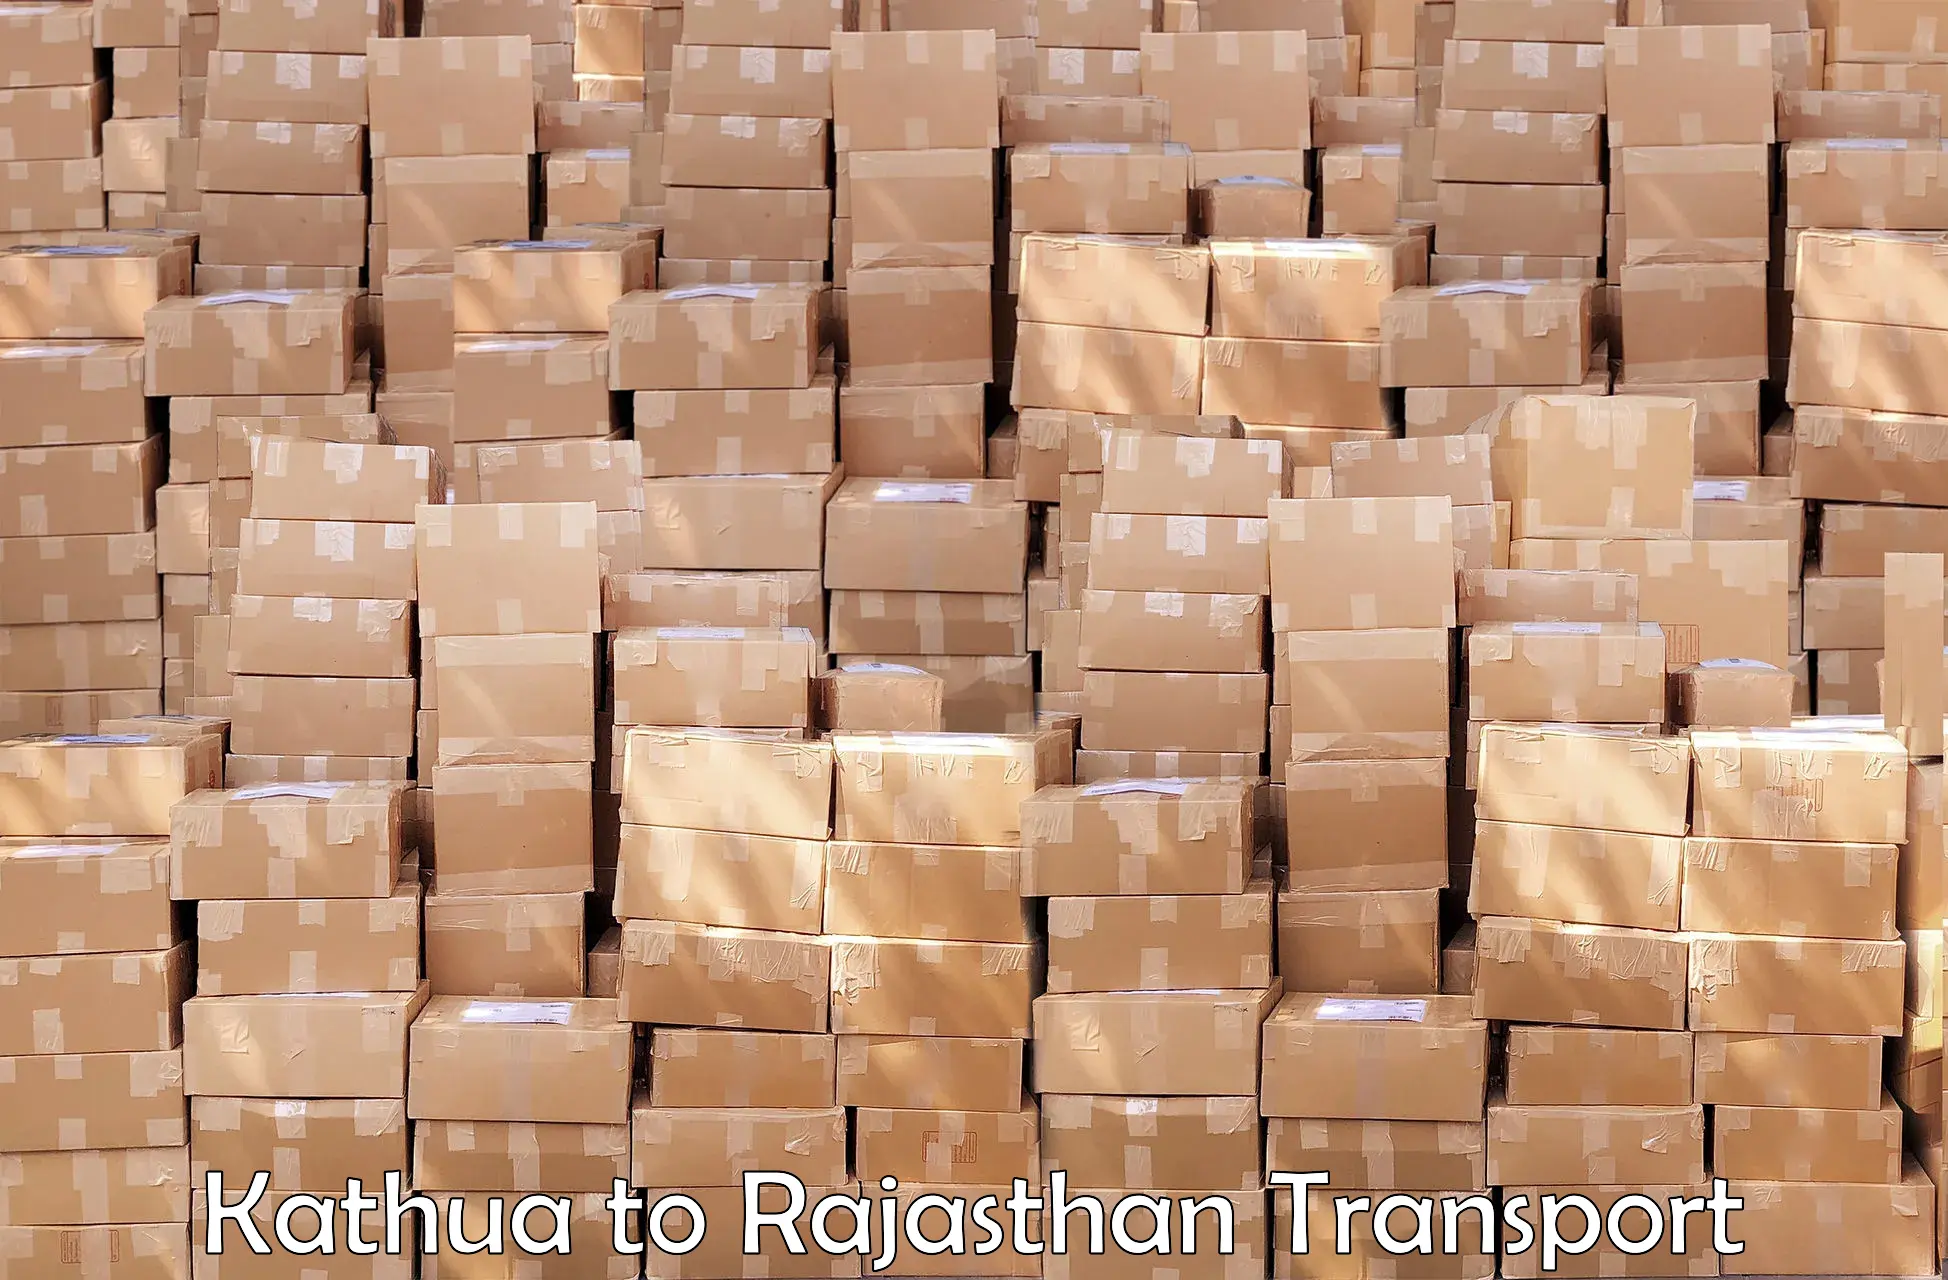 Part load transport service in India Kathua to Jaipur